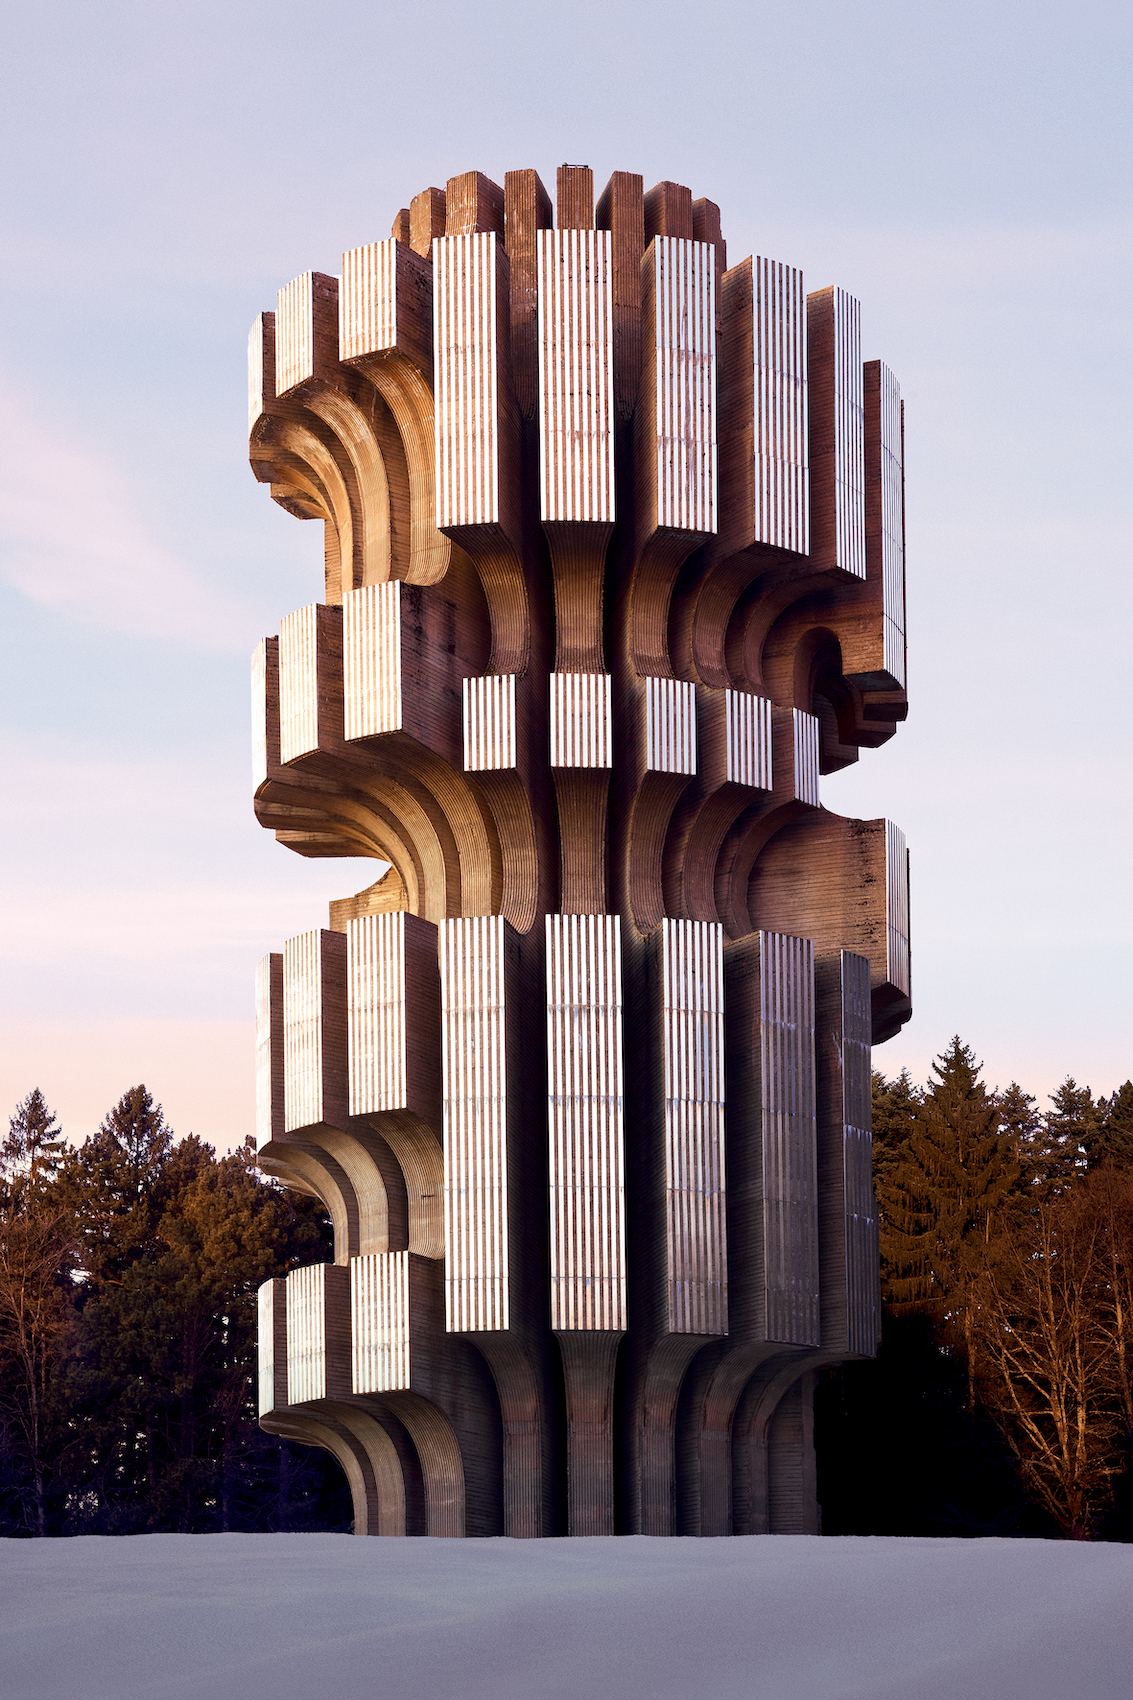 Kozara by Vincent Fournier – a 1972 WWII memorial monument in the Kozara mountains of Bosnia and Herzegovina in Effect Magazine